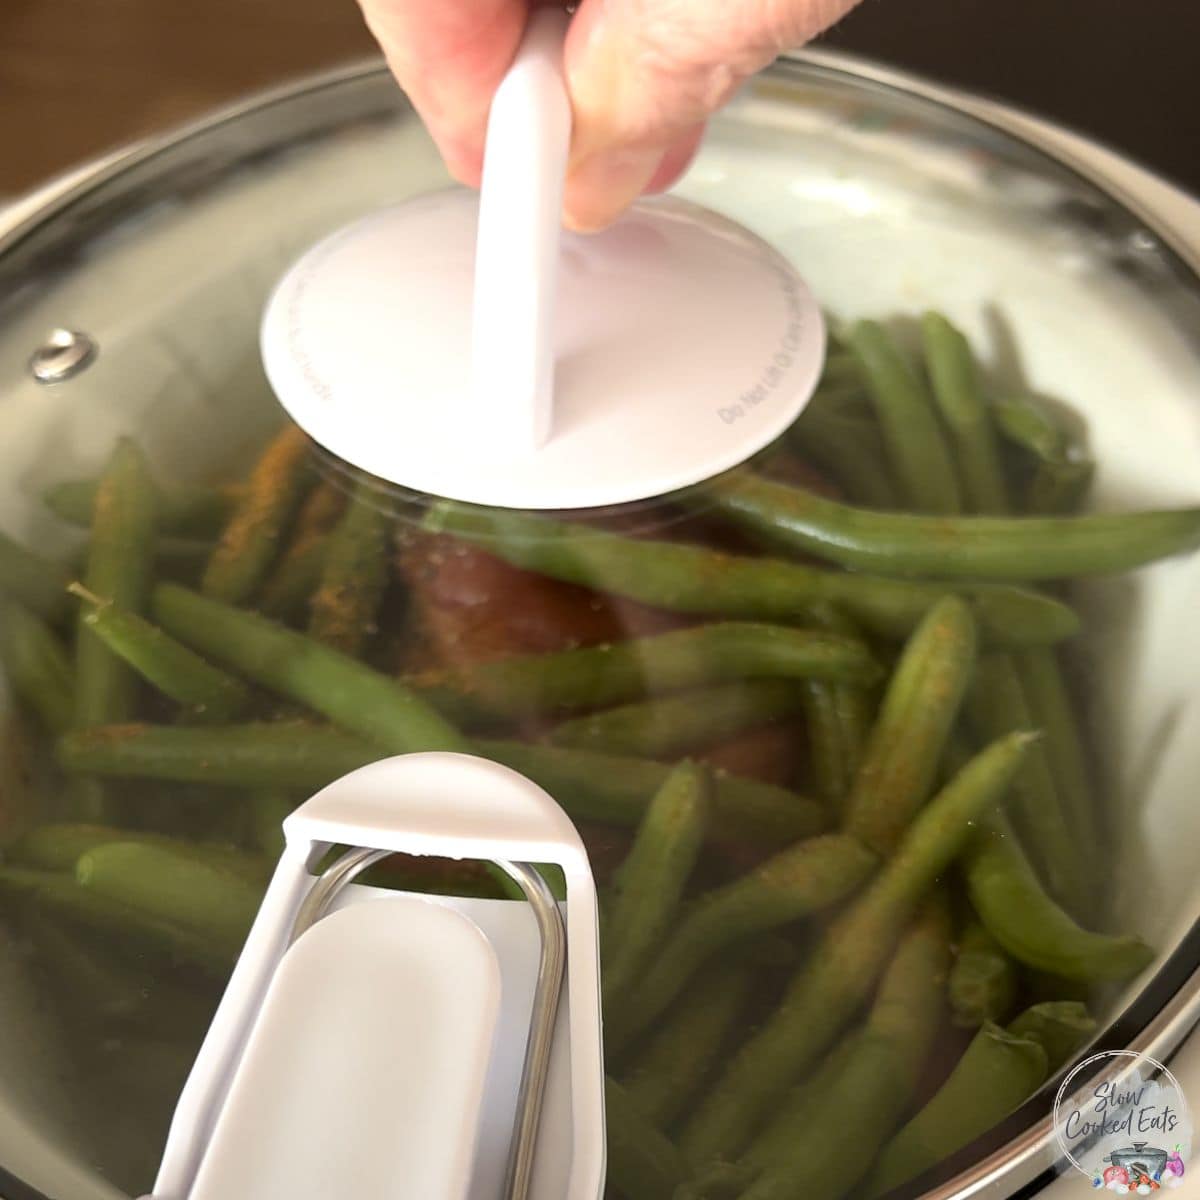 Covering a crock pot of green beans with a clear glass lid.